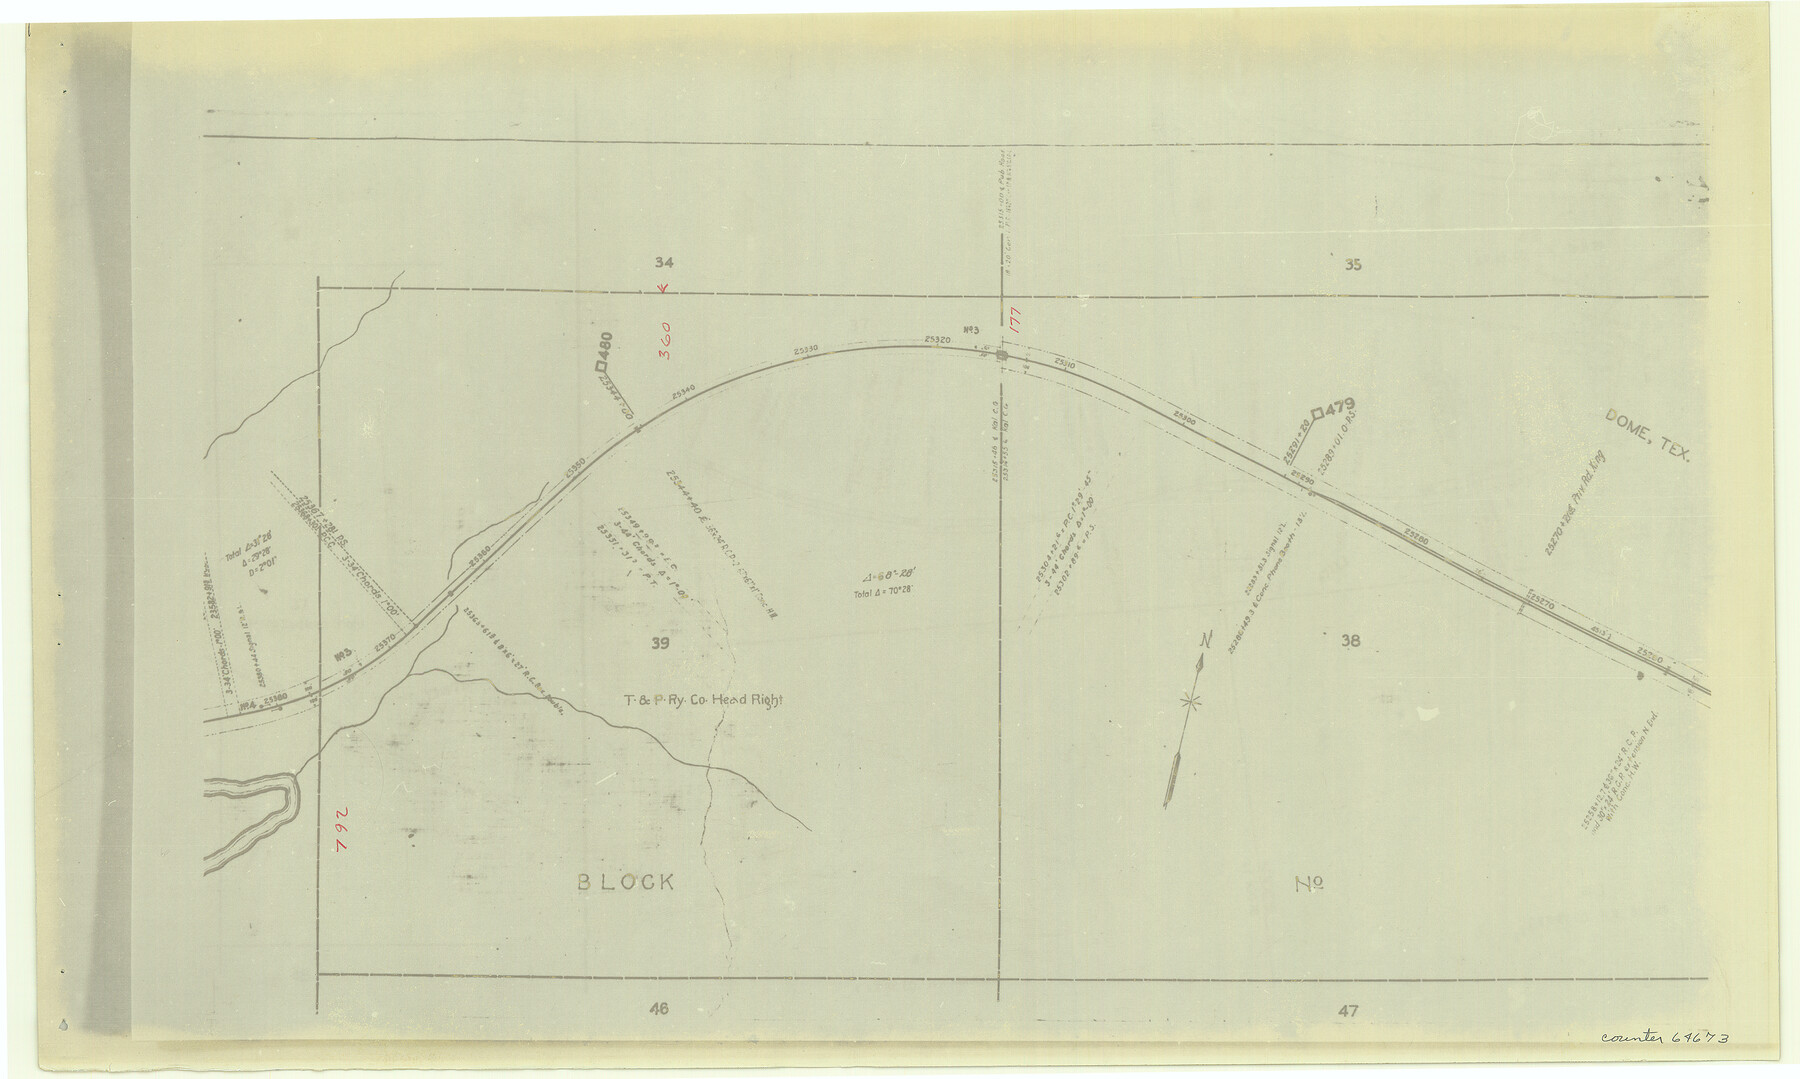 64673, [Right of Way & Track Map, The Texas & Pacific Ry. Co. Main Line], General Map Collection